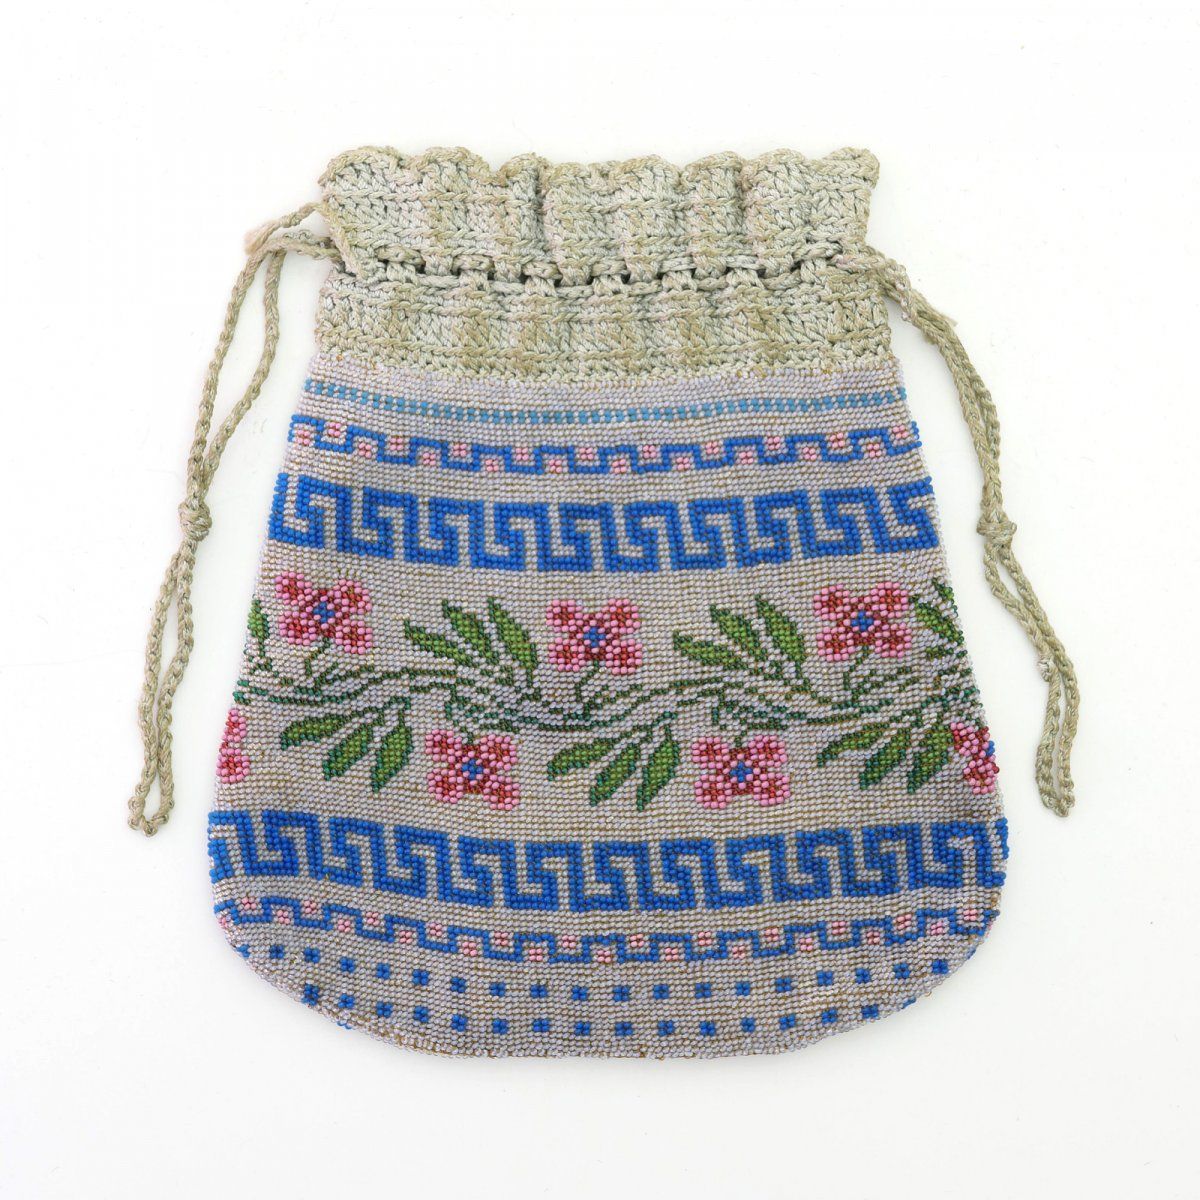 Null Pouch with flowers and meander decor, mid-19th century, H. 19 x 17 cm. Knit&hellip;